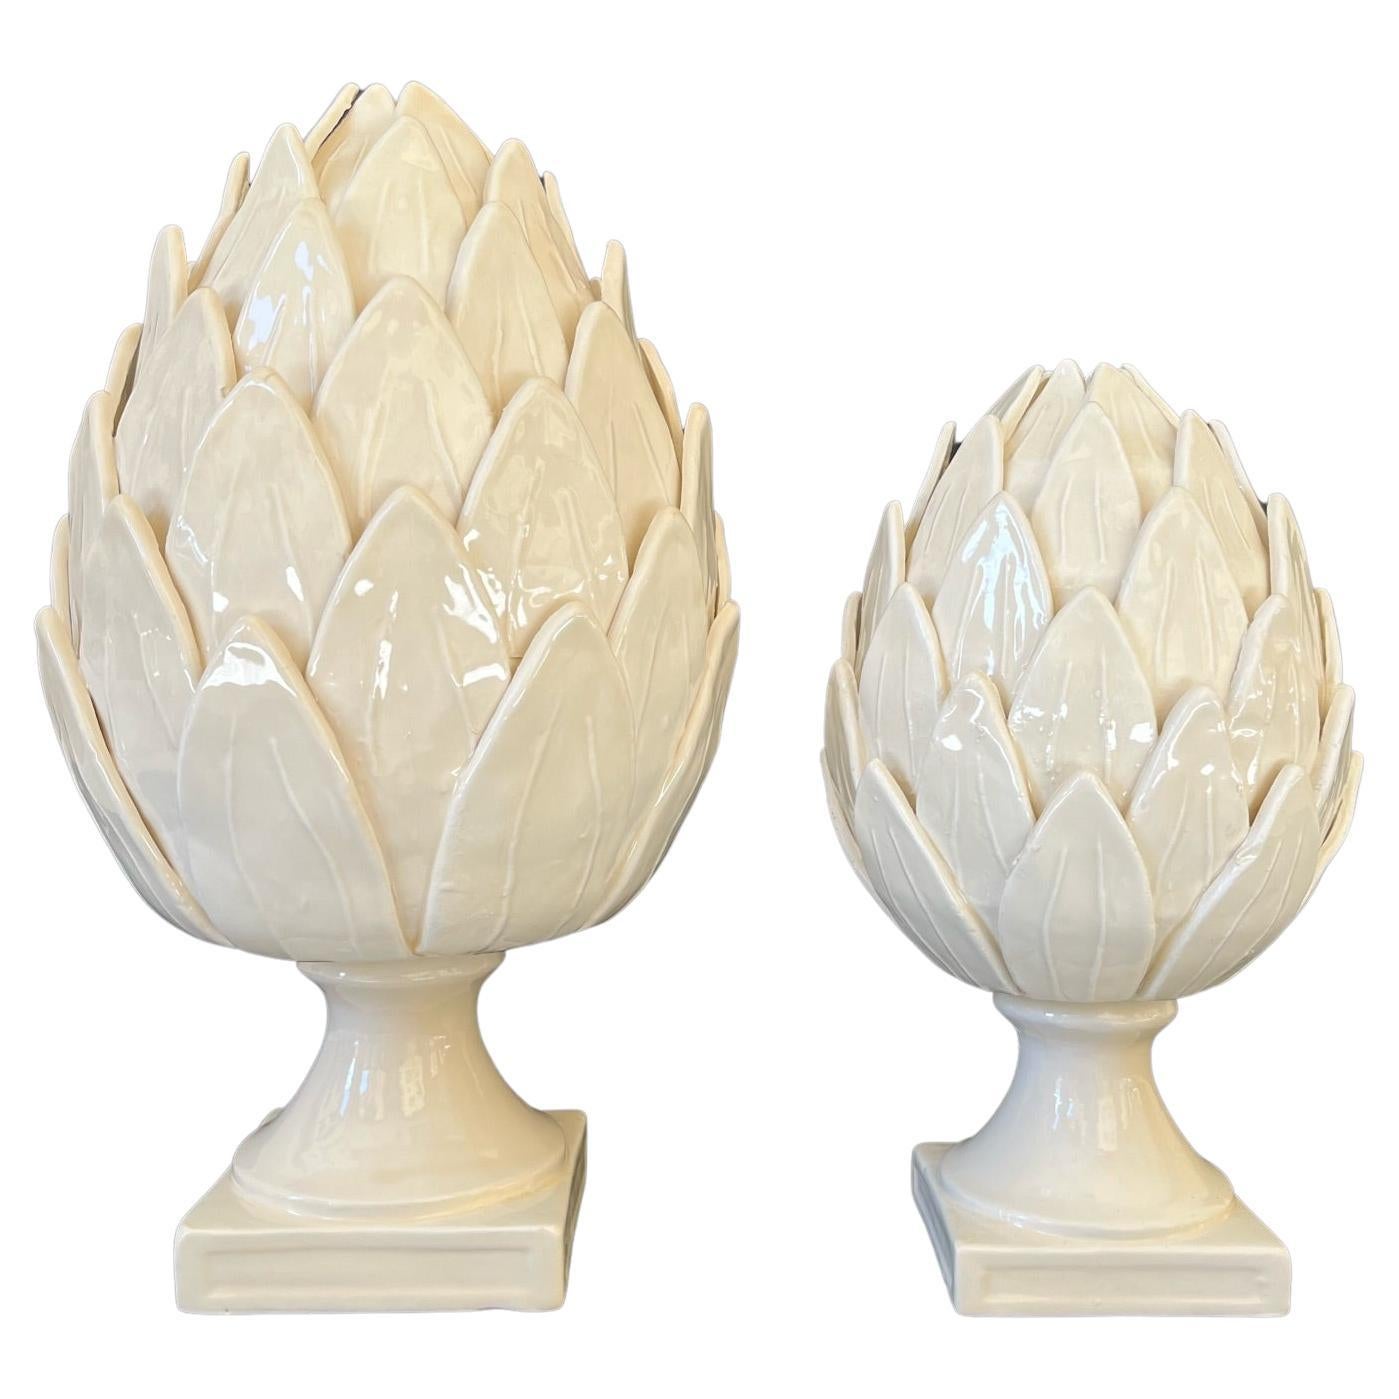 Pair of Big and Small White Artichokes